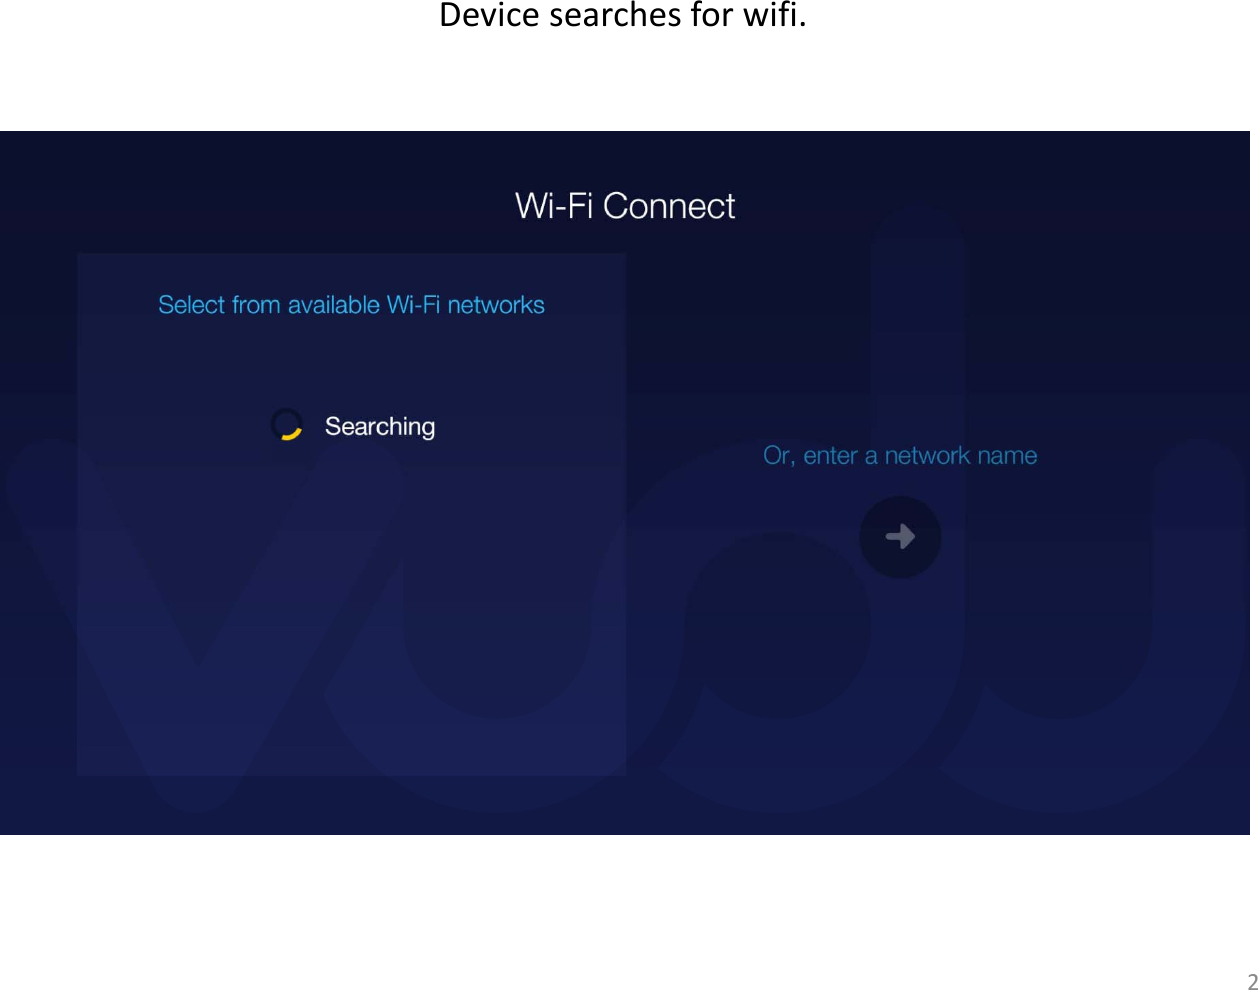 Devicesearchesforwifi.2